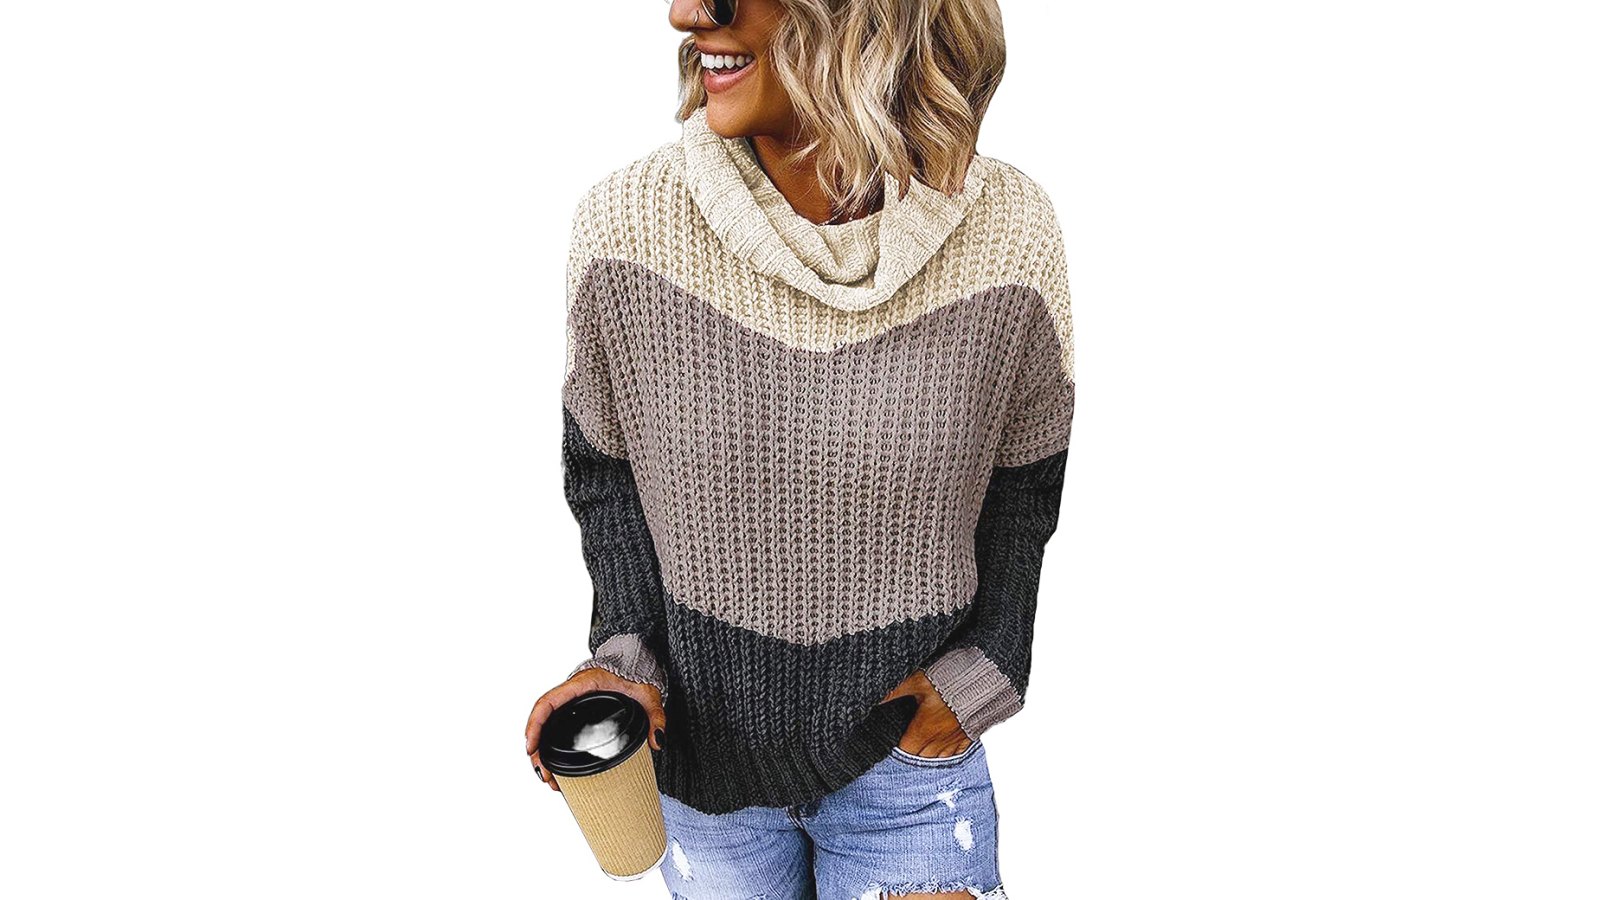 ZKESS Casual Long Sleeve Turtleneck Chunky Knit Pullover Sweater